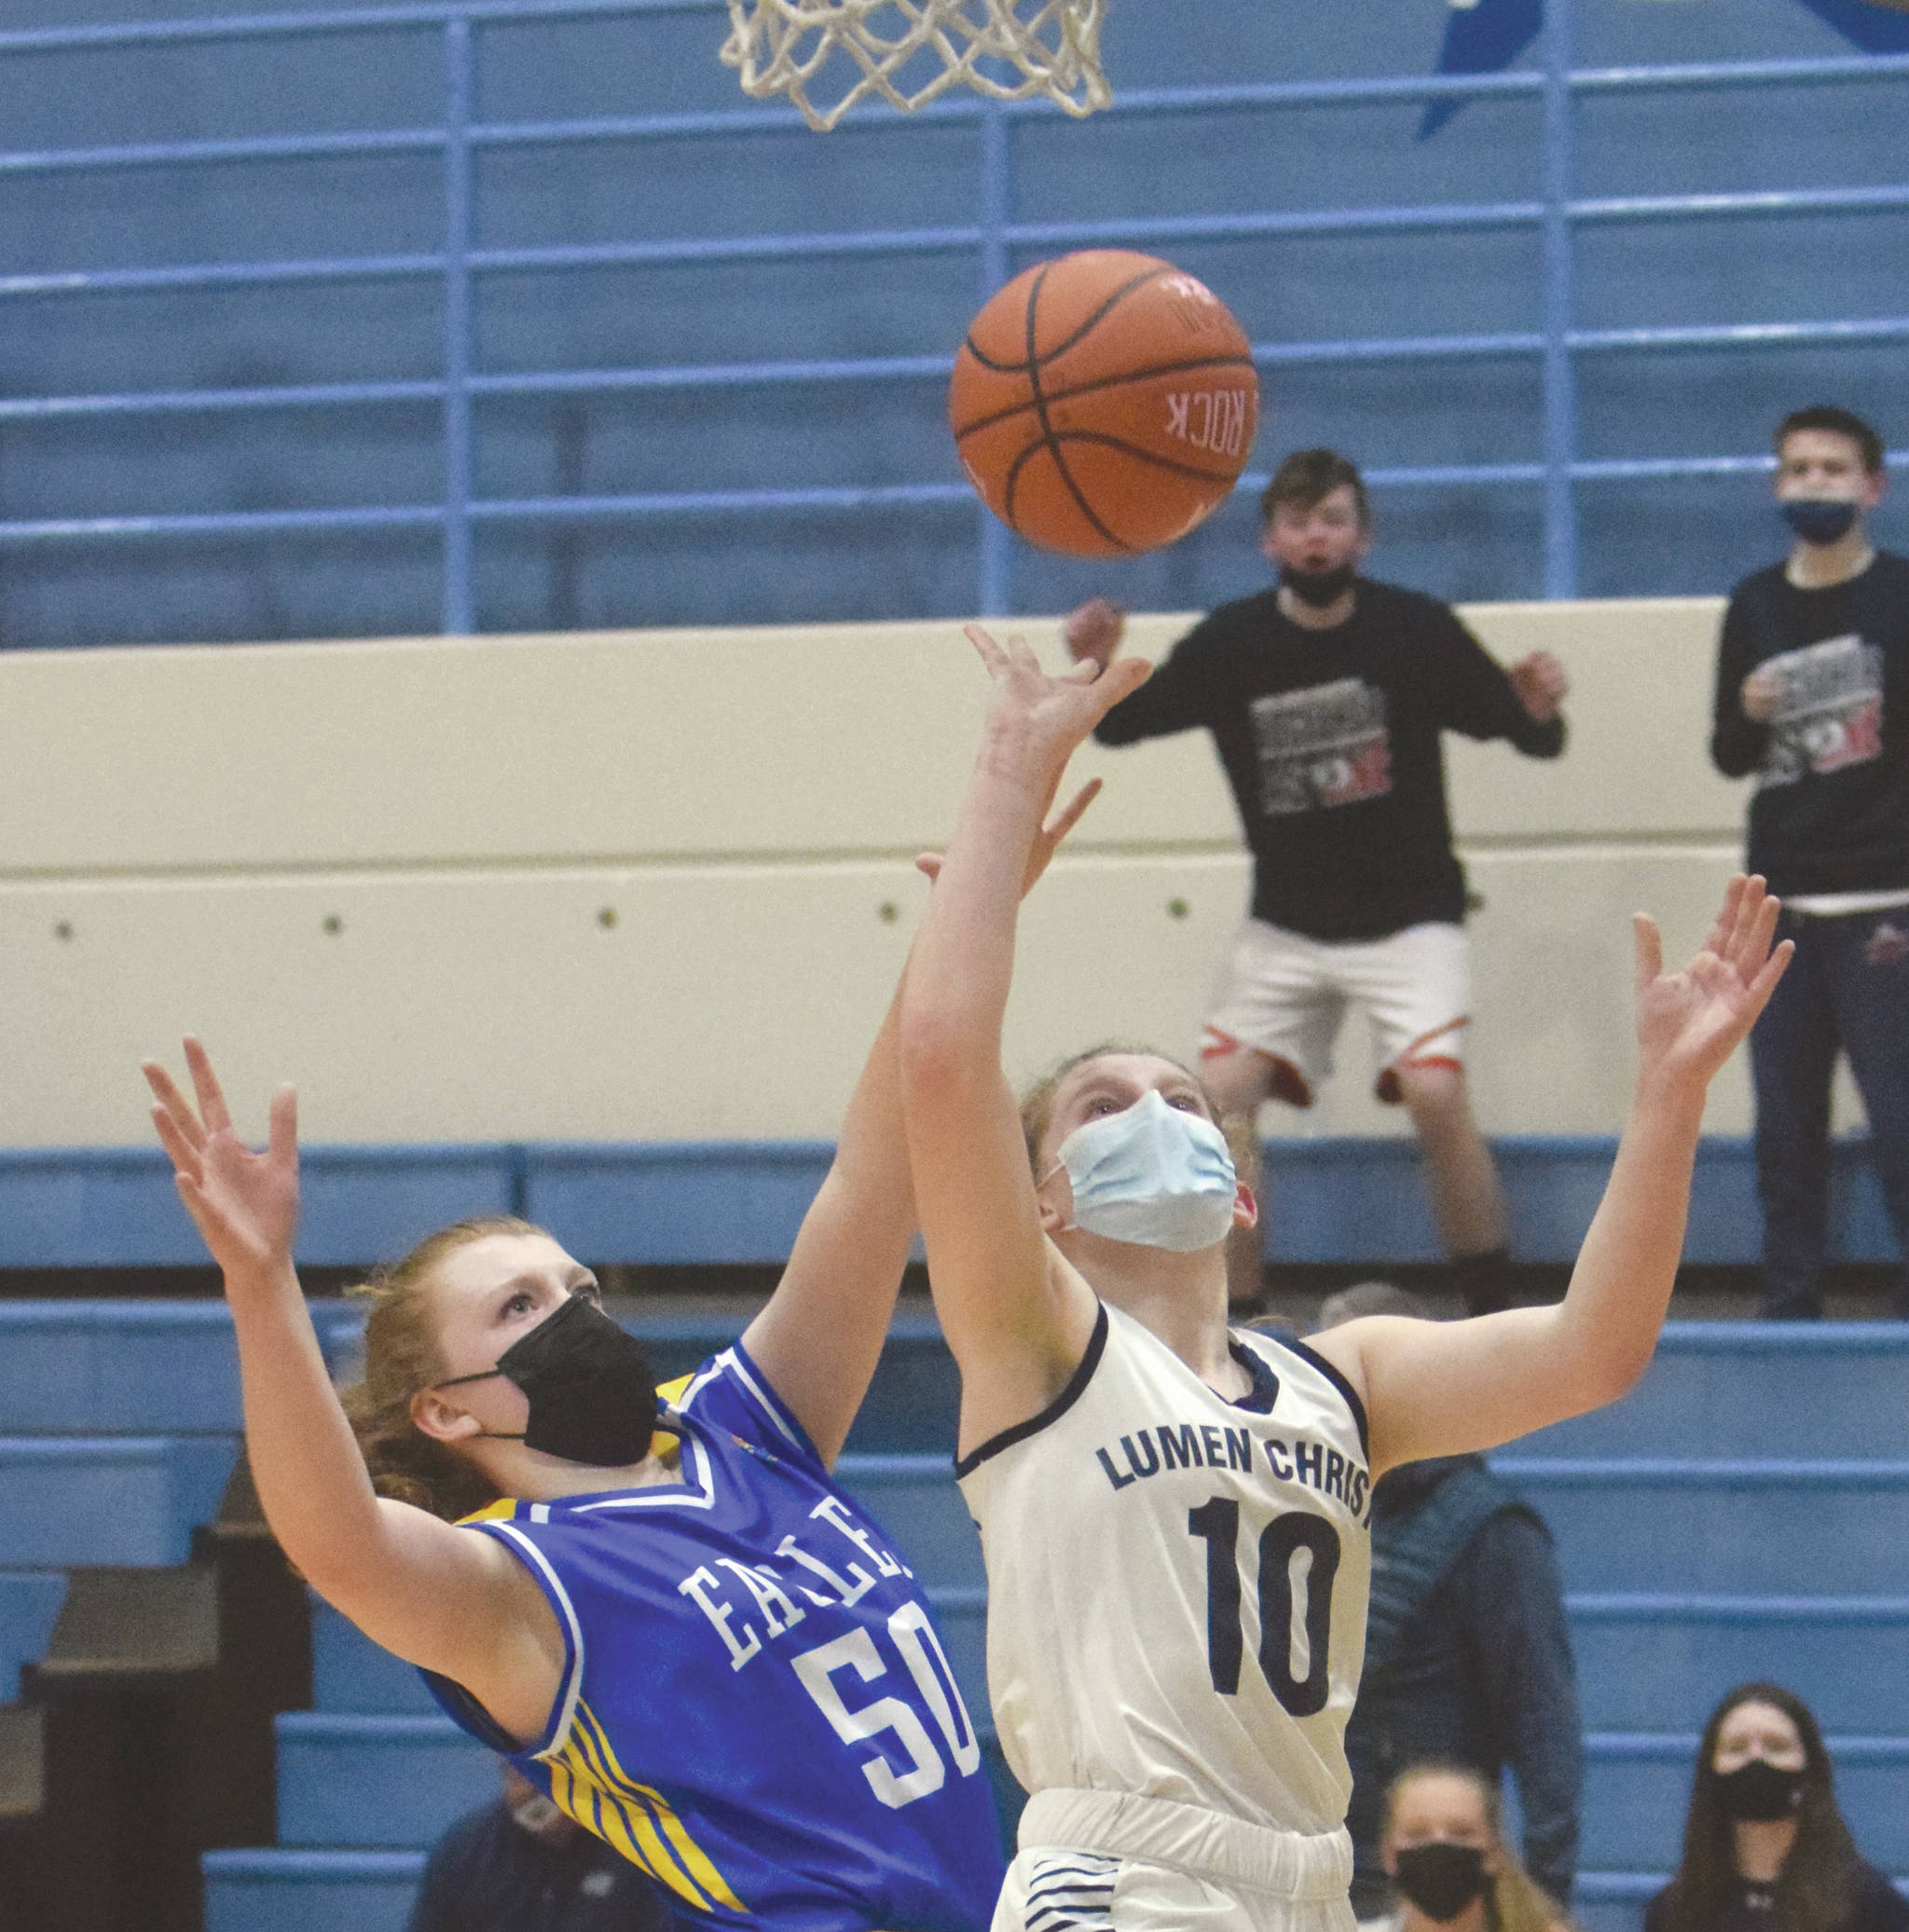 Lumen Christi’s Emily Ross drives to the basket on Cook Inlet Academy’s Hope Hillyer during the Peninsula Conference championship game Friday, March 19, 2021, at Soldotna High School in Soldotna, Alaska. (Photo by Jeff Helminiak/Peninsula Clarion)